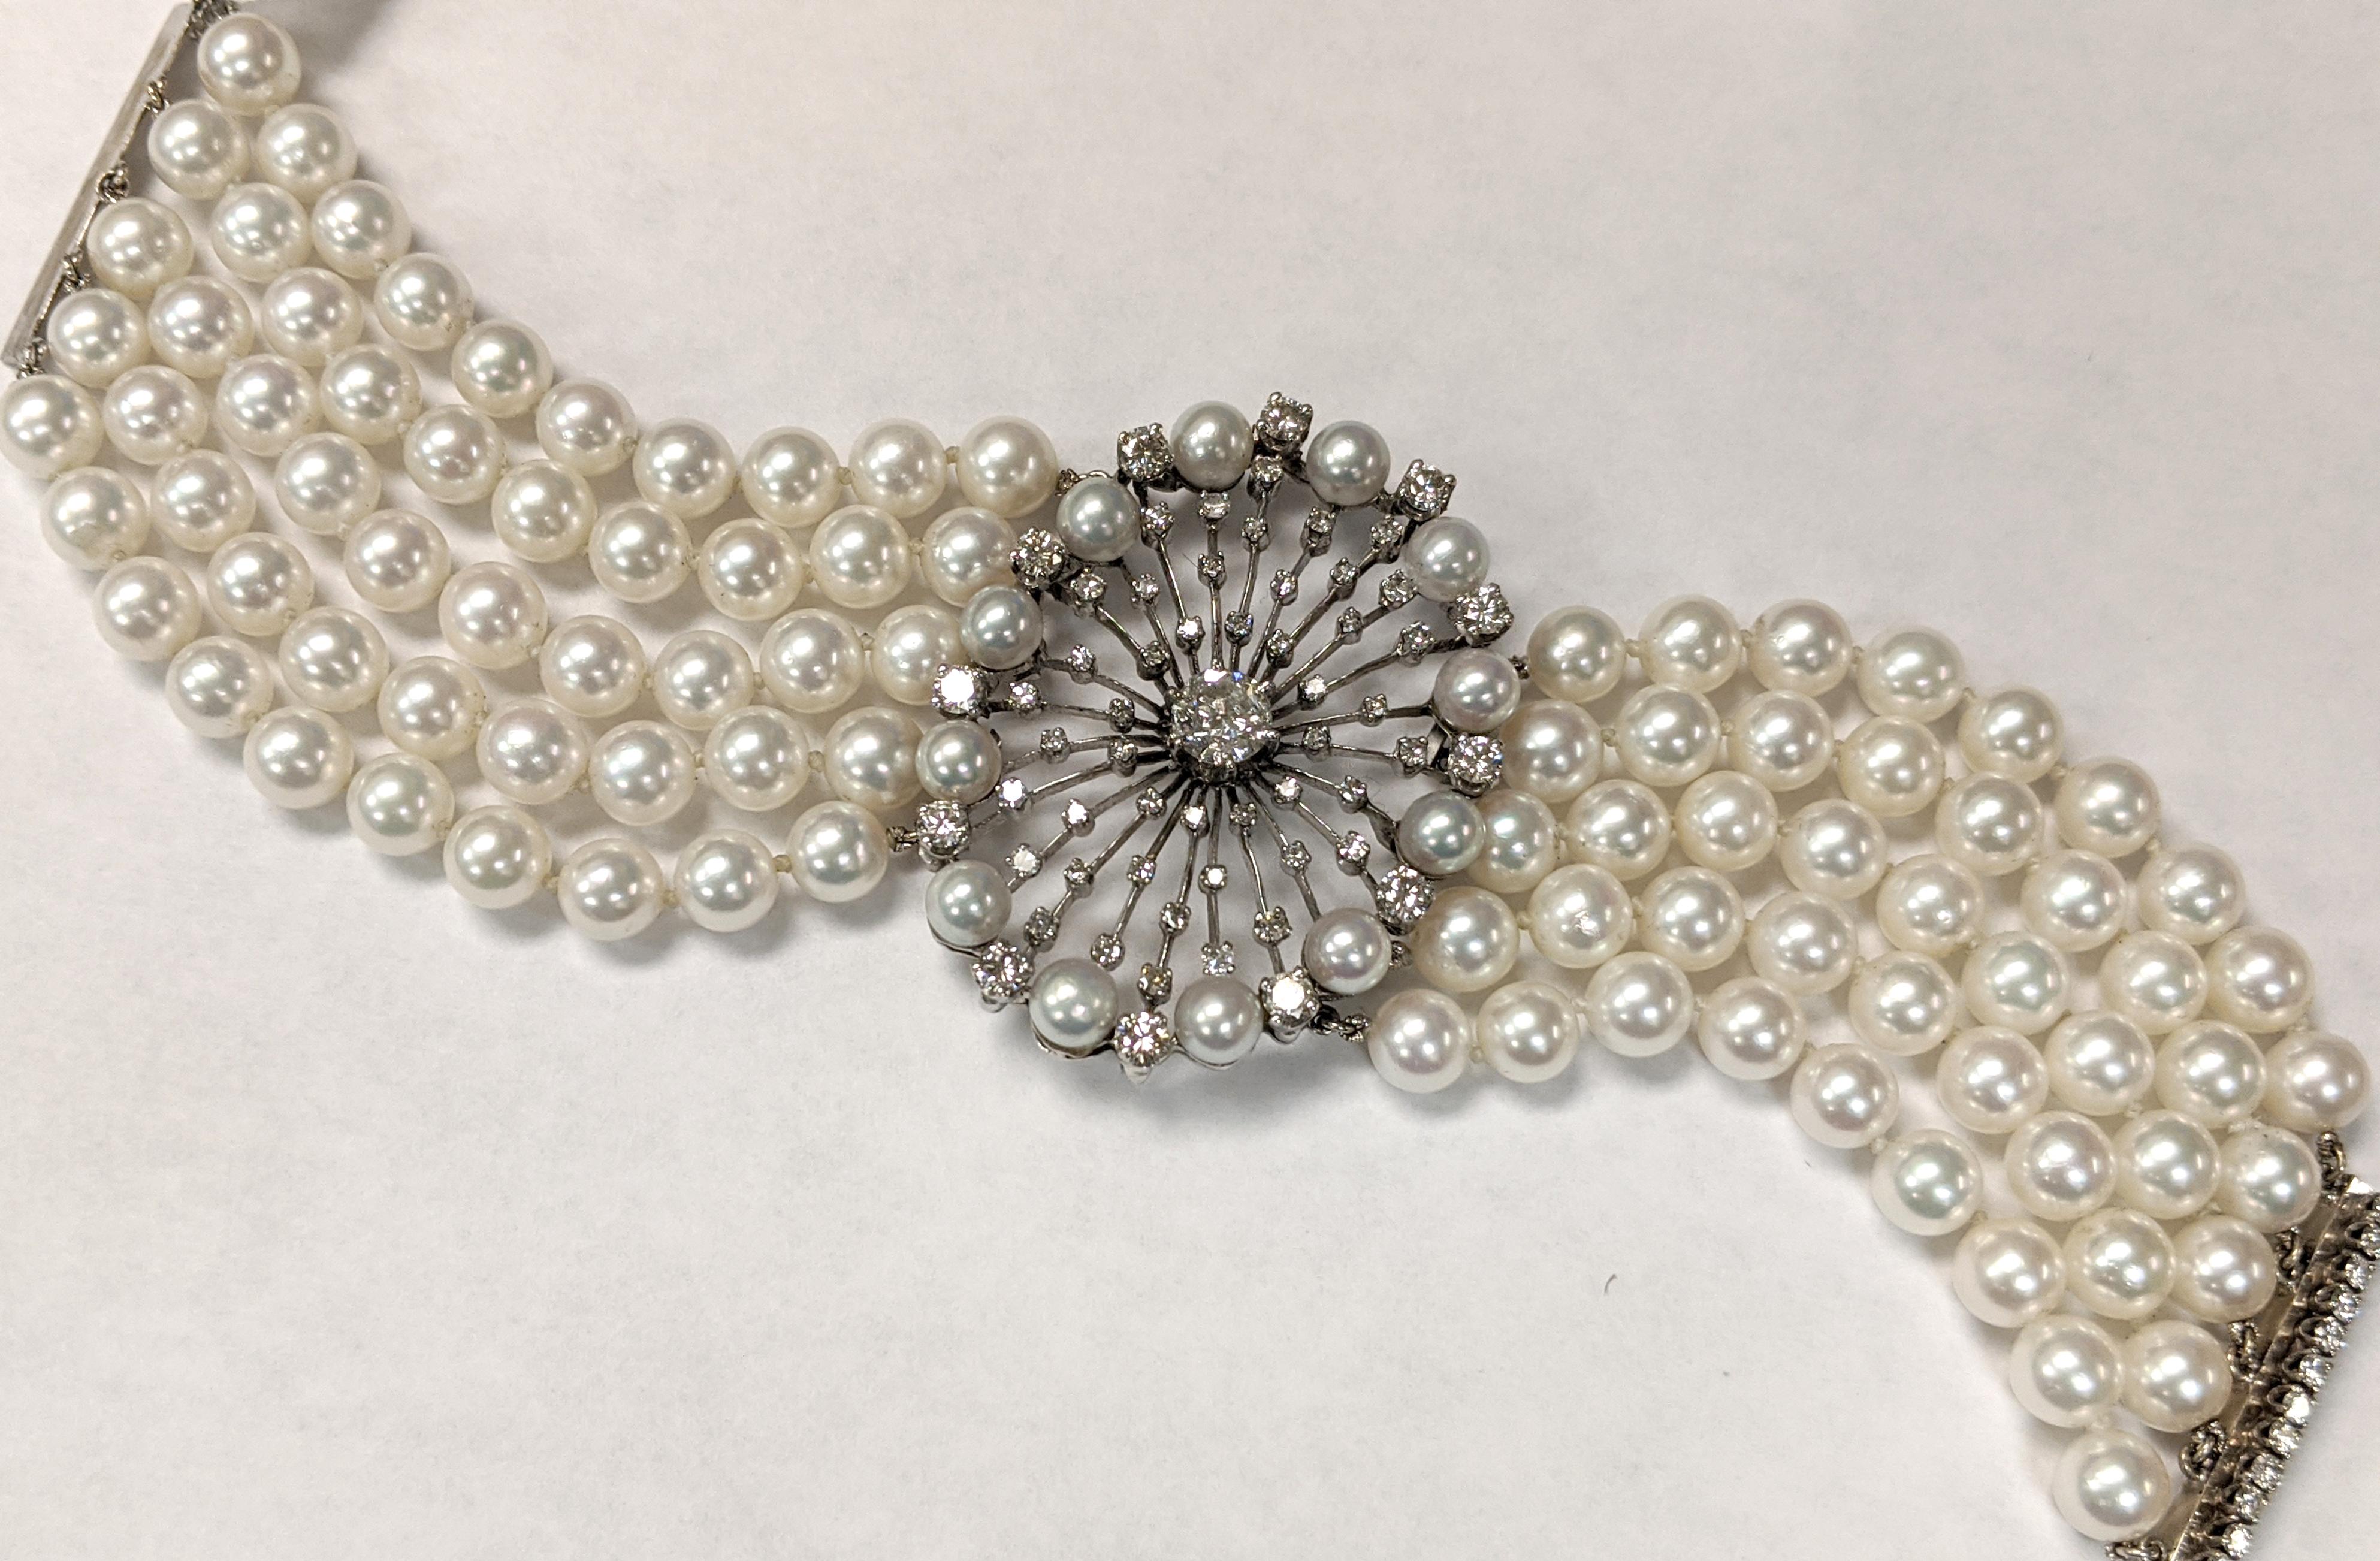 A five-strand pearl bracelet from the Victorian Era, featuring nearly 100 round white pearls. In the center of the bracelet is an oval open metalwork medallion studded with diamonds.

The centerpiece features an old European-cut diamond in the